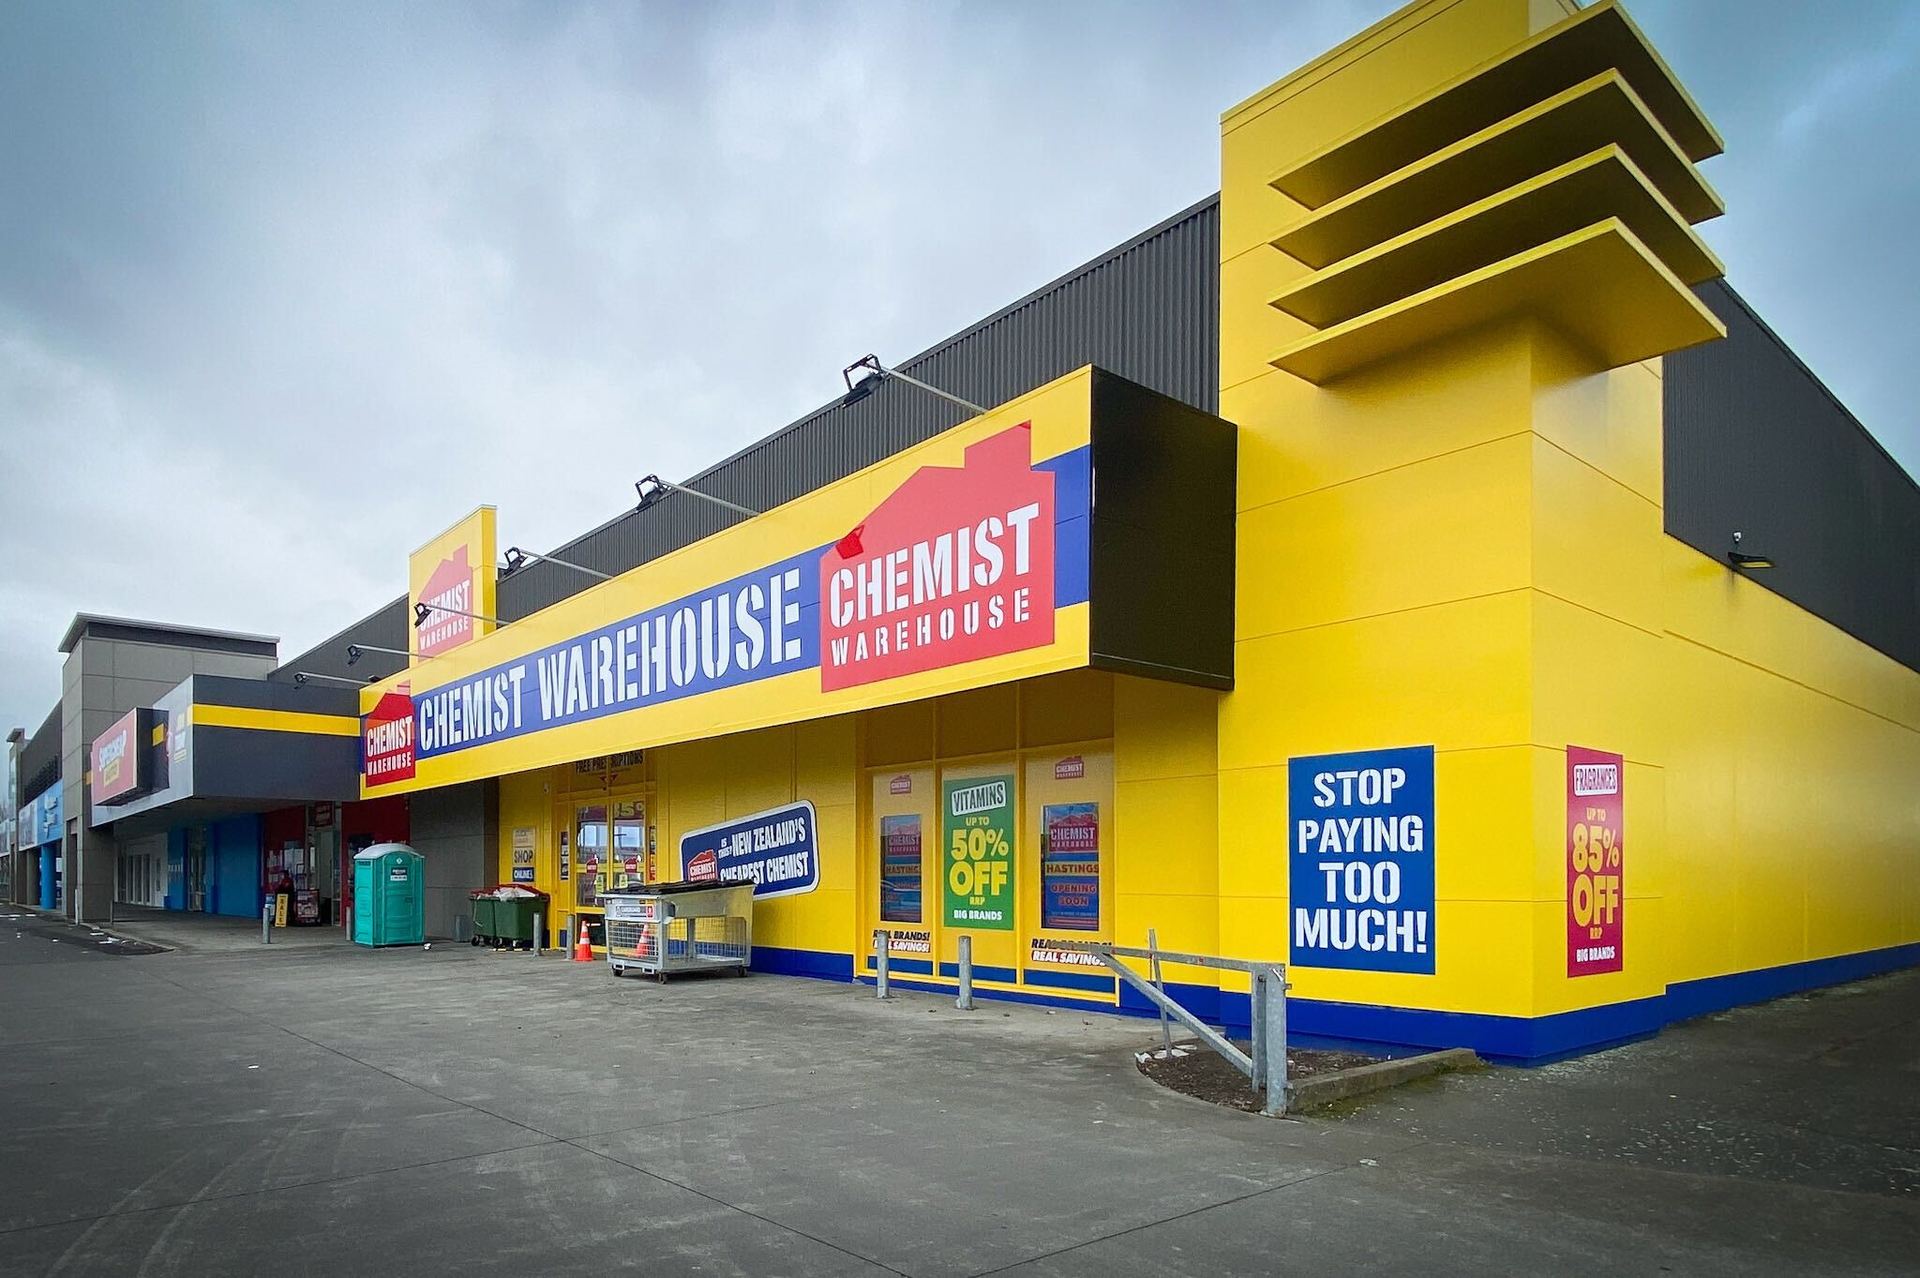 Chemist Warehouse opens 500th store - Franchise Executives